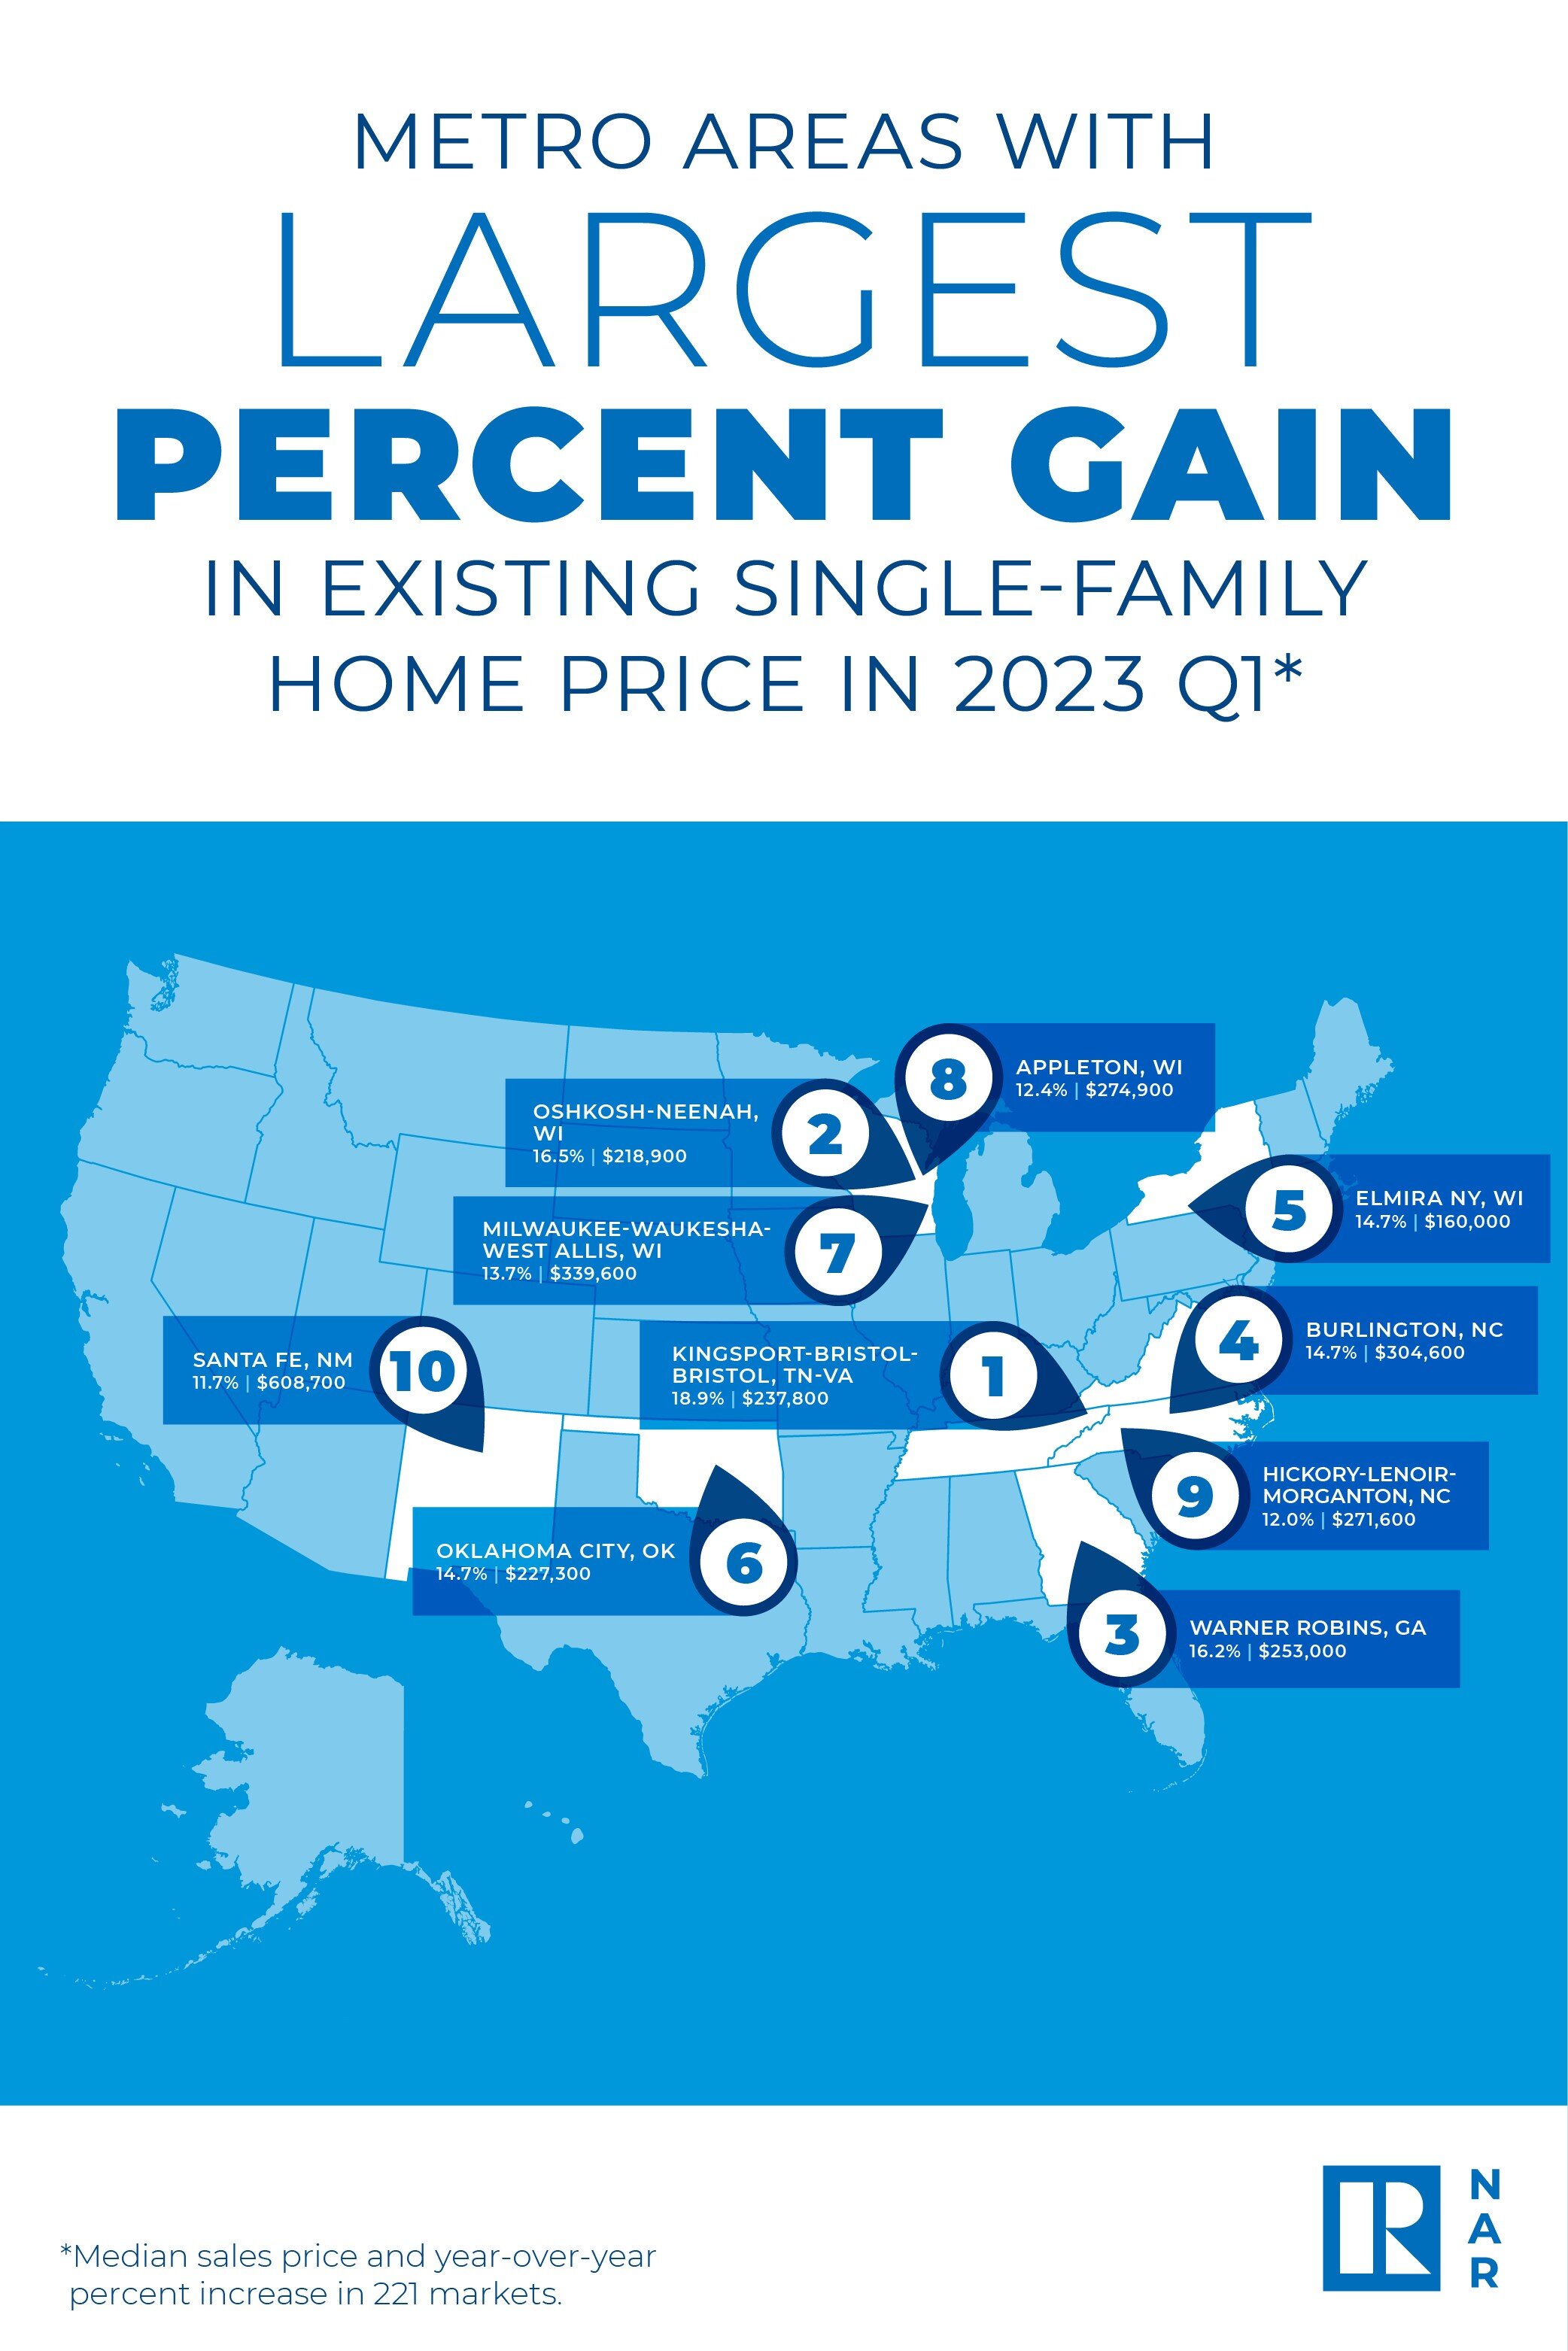 https://www.worldpropertyjournal.com/news-assets-2/Infographic-NAR%20Q1%202023%20Metro%20Home%20Prices.jpg